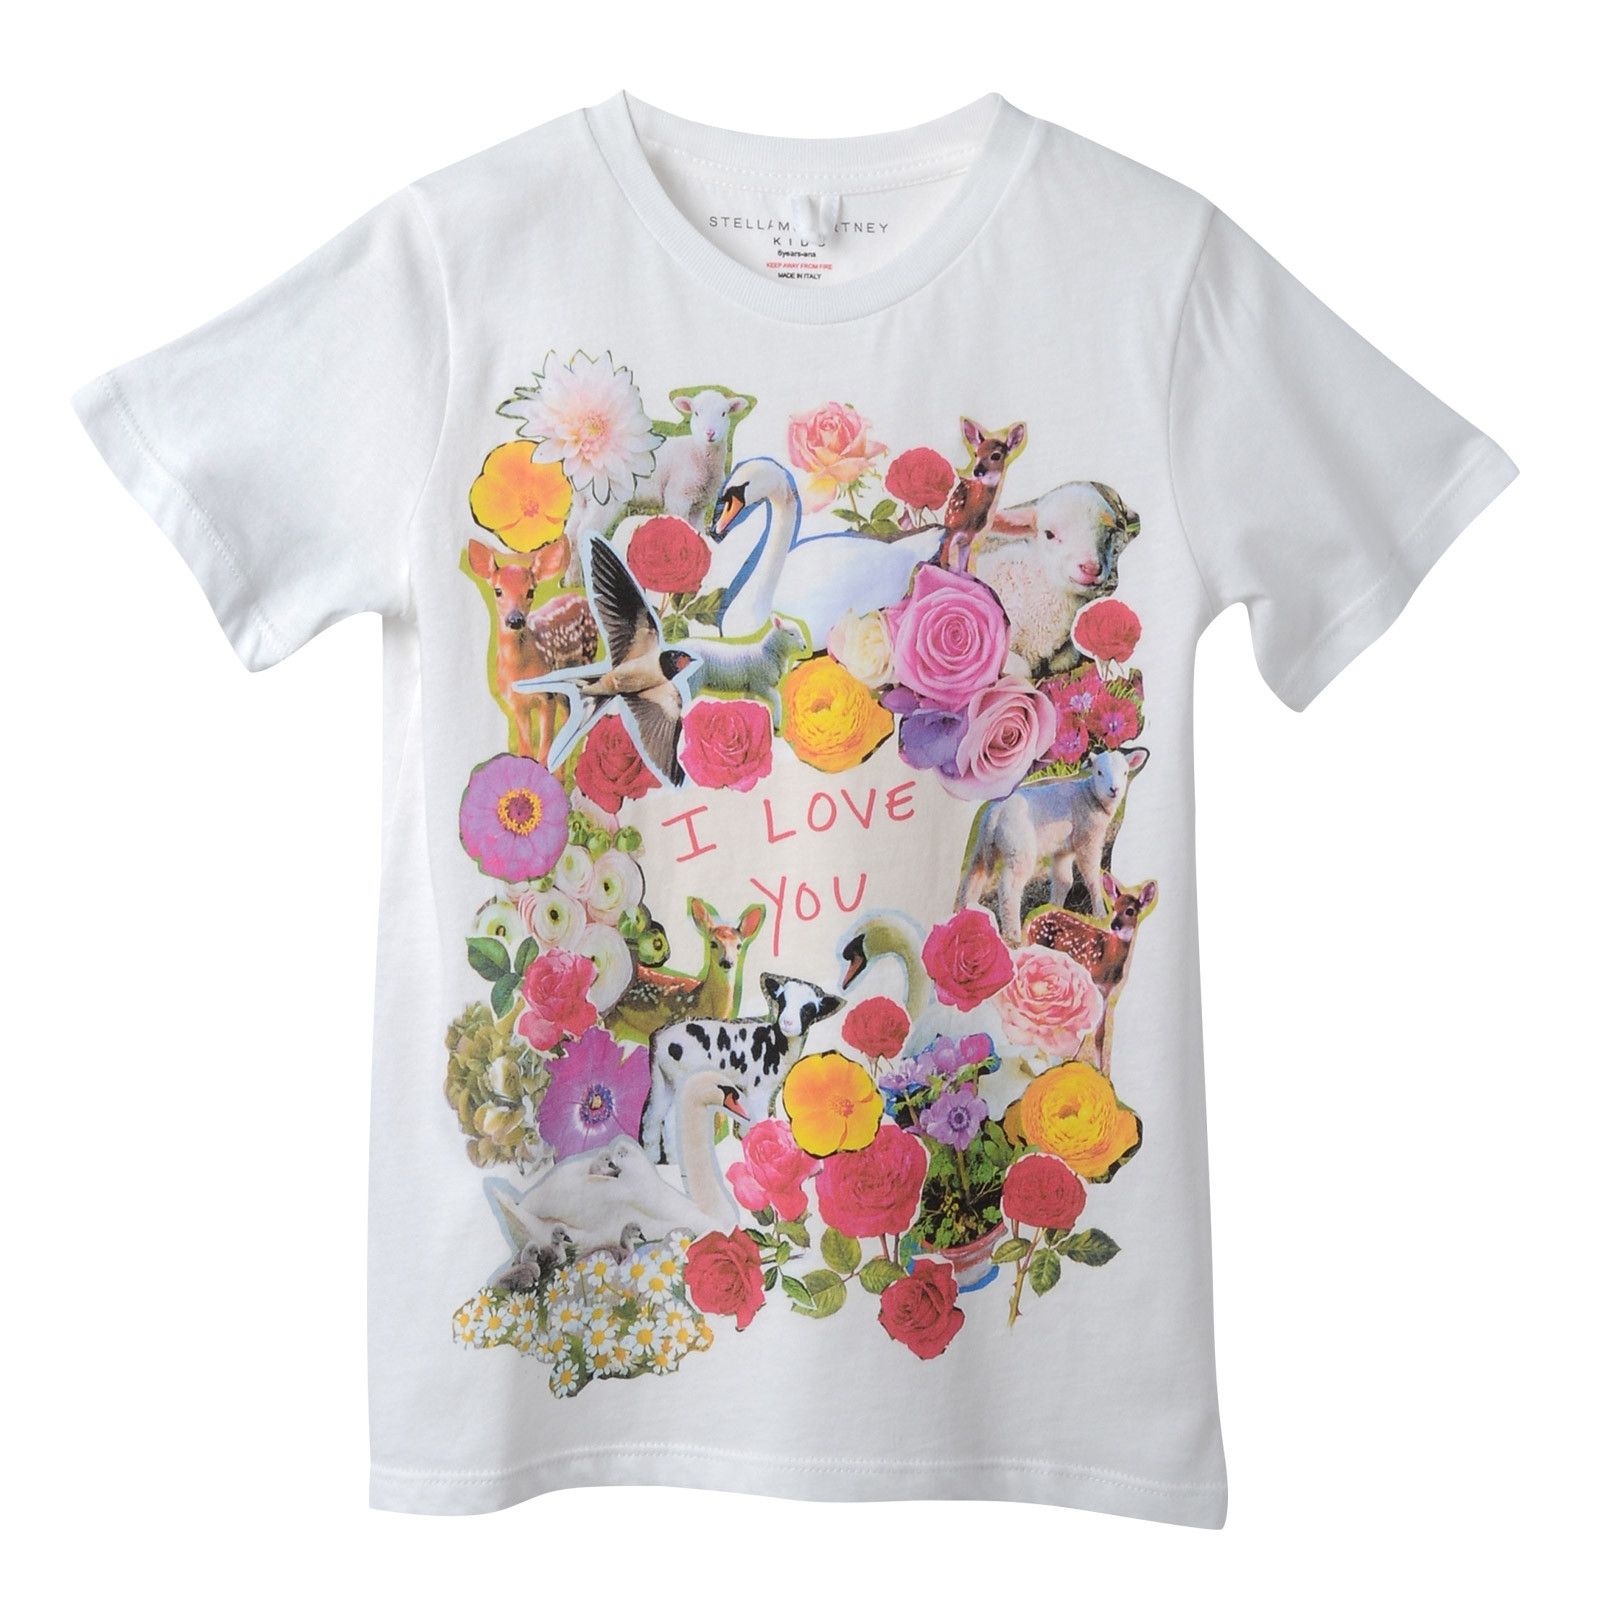 Girls White Cotton T-Shirt With Floral 'I love you' Print Trims - CÉMAROSE | Children's Fashion Store